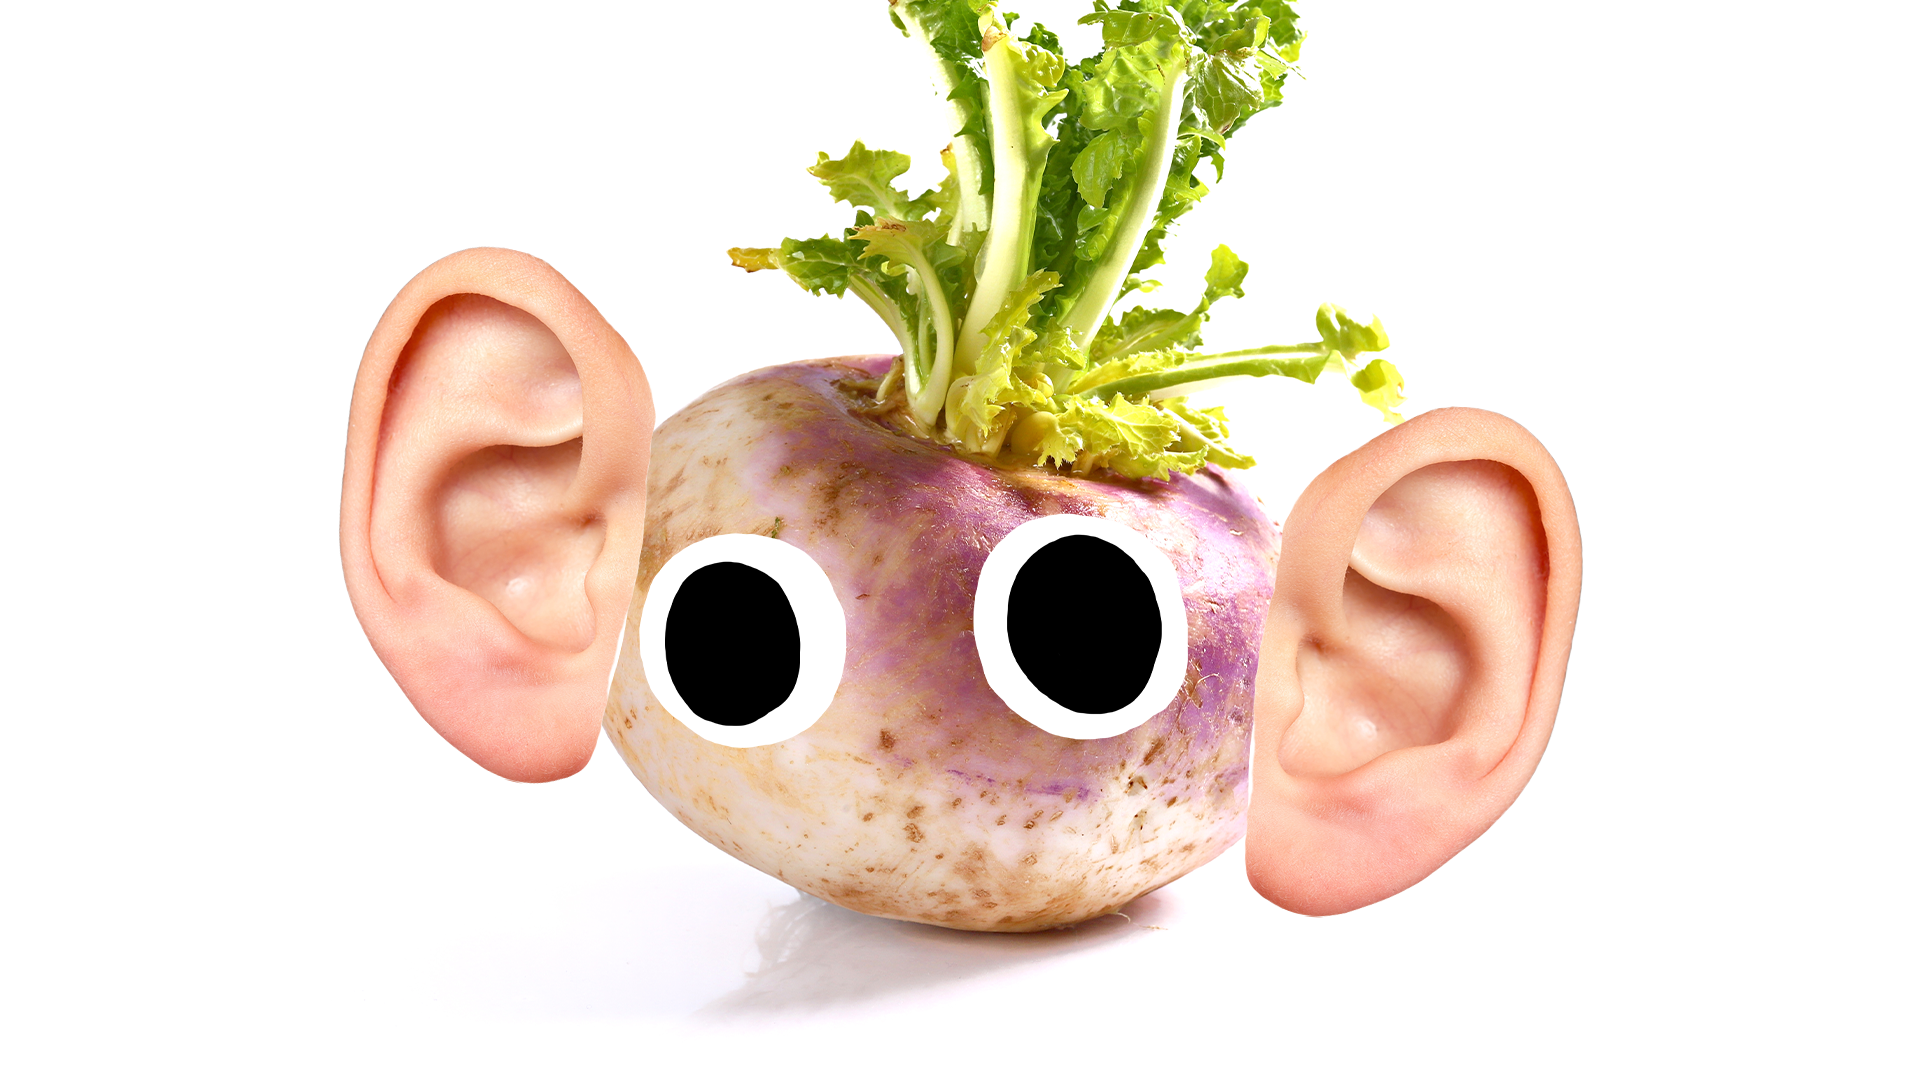 Turnip with ears and face on white background